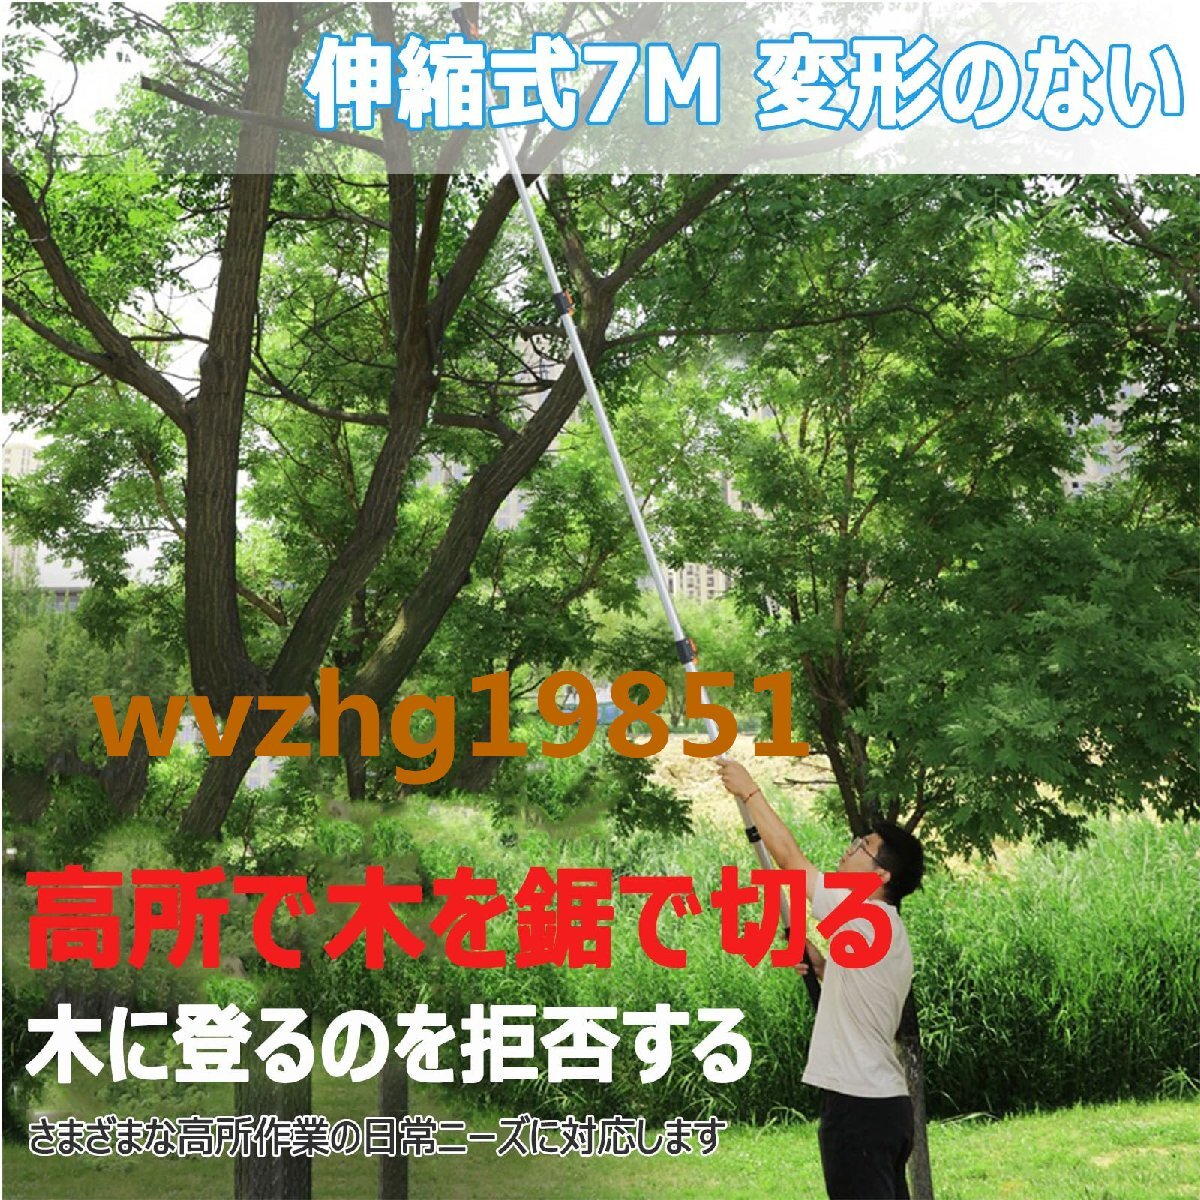  height branch saw flexible type pruning at high place basami heights pruning . height branch saw SK5 high class charcoal element blade branch pruning super light weight huge . power manual simple operation 1.22m~3m flexible 